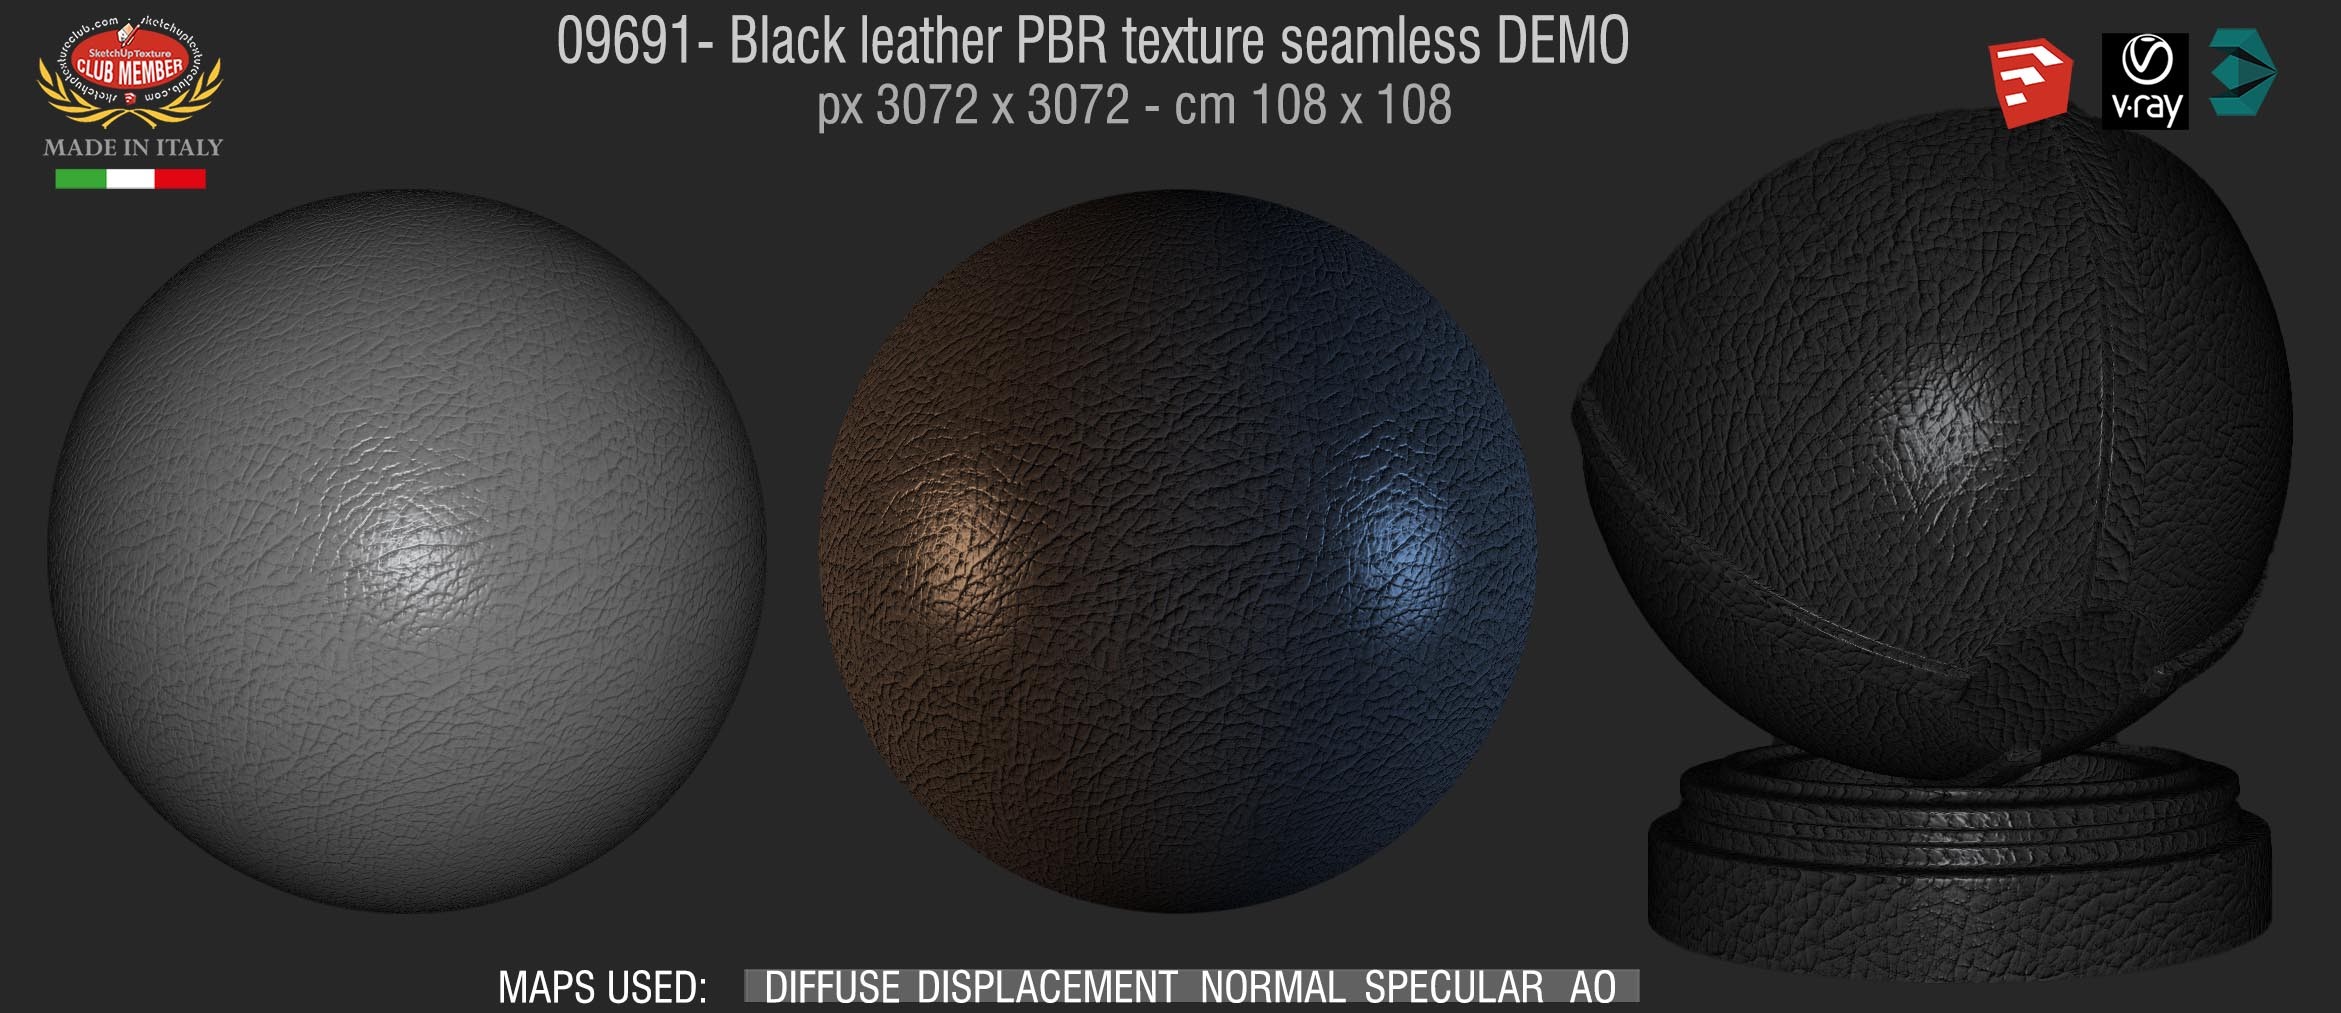 0961 Black leather PBR texture seamless DEMO